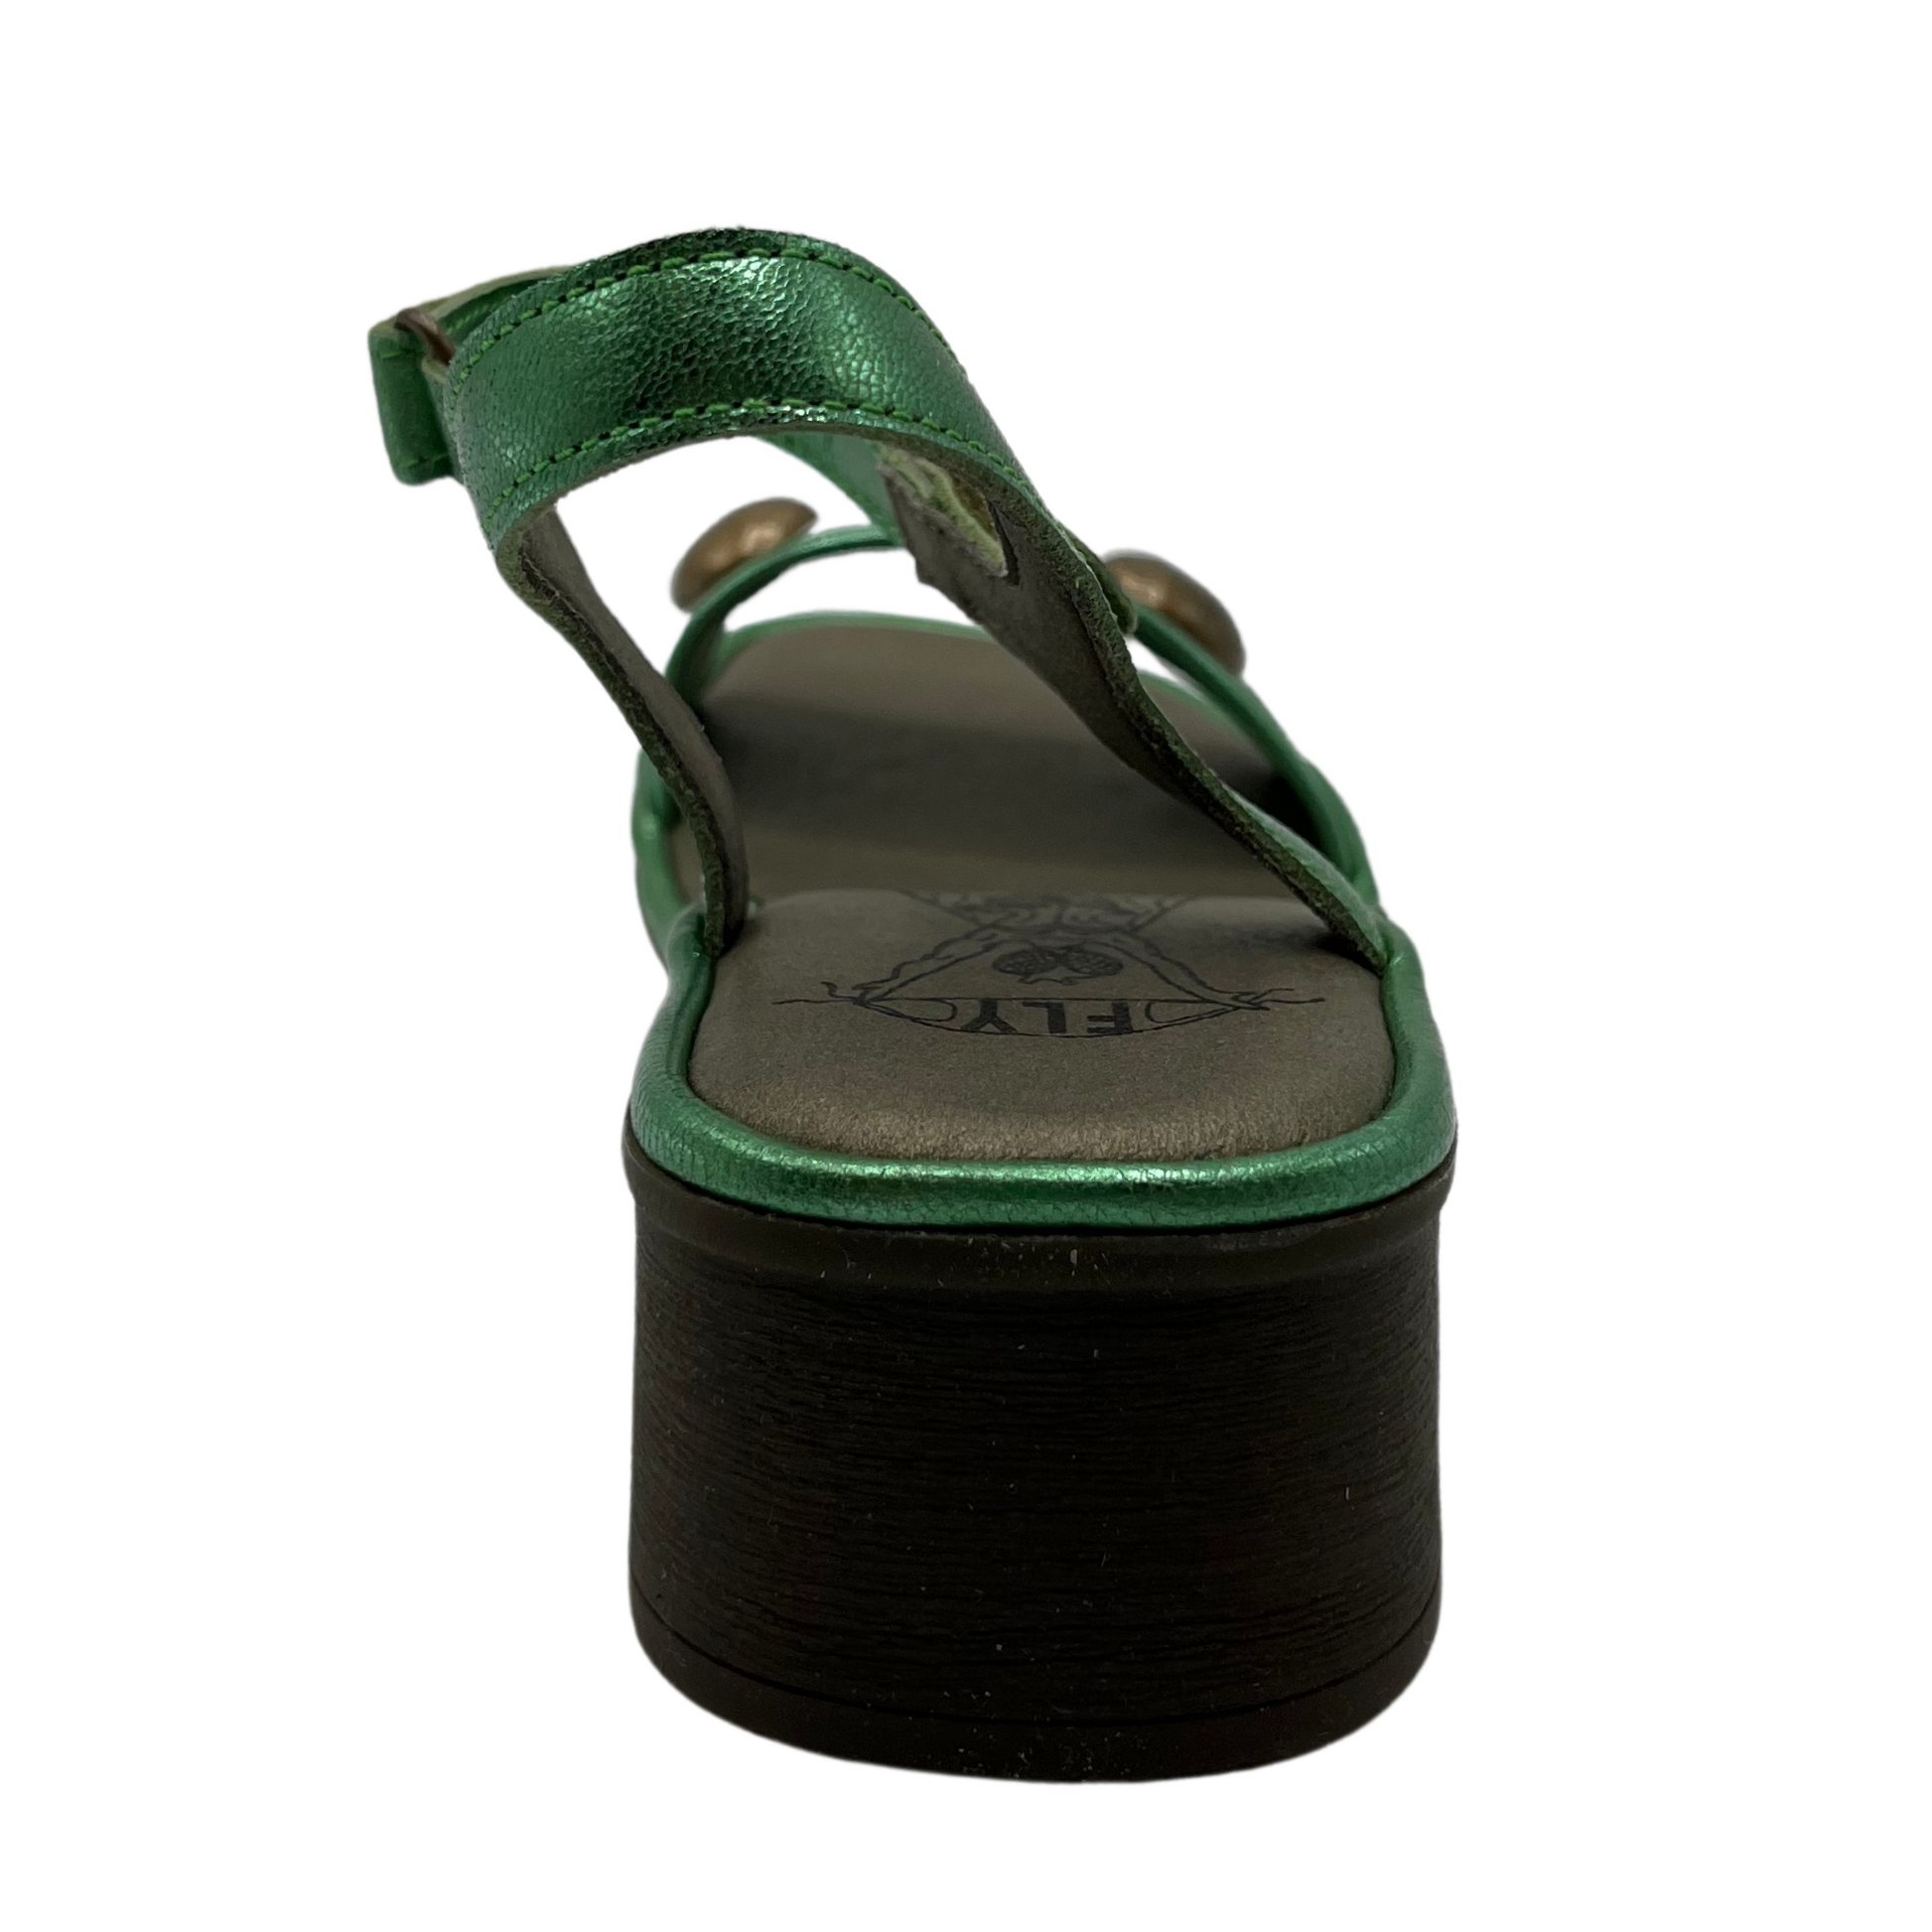 Back view of green leather sandal with rounded toe, velcro strap and block heel